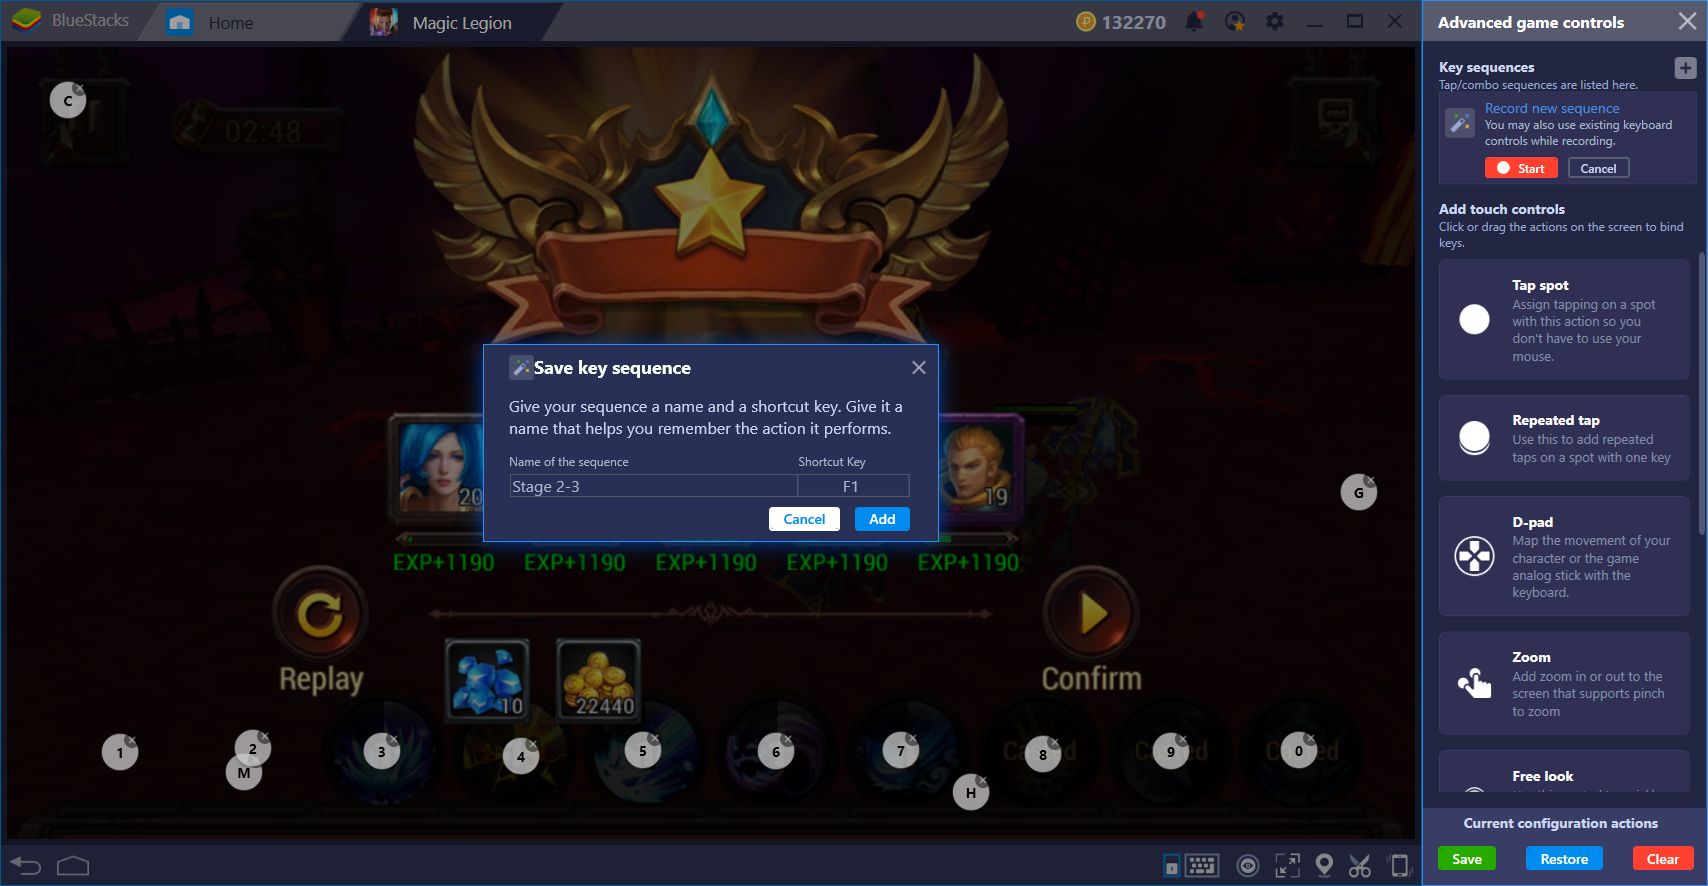 How to Improve Your Experience in Magic Legion—Hero Legends With BlueStacks